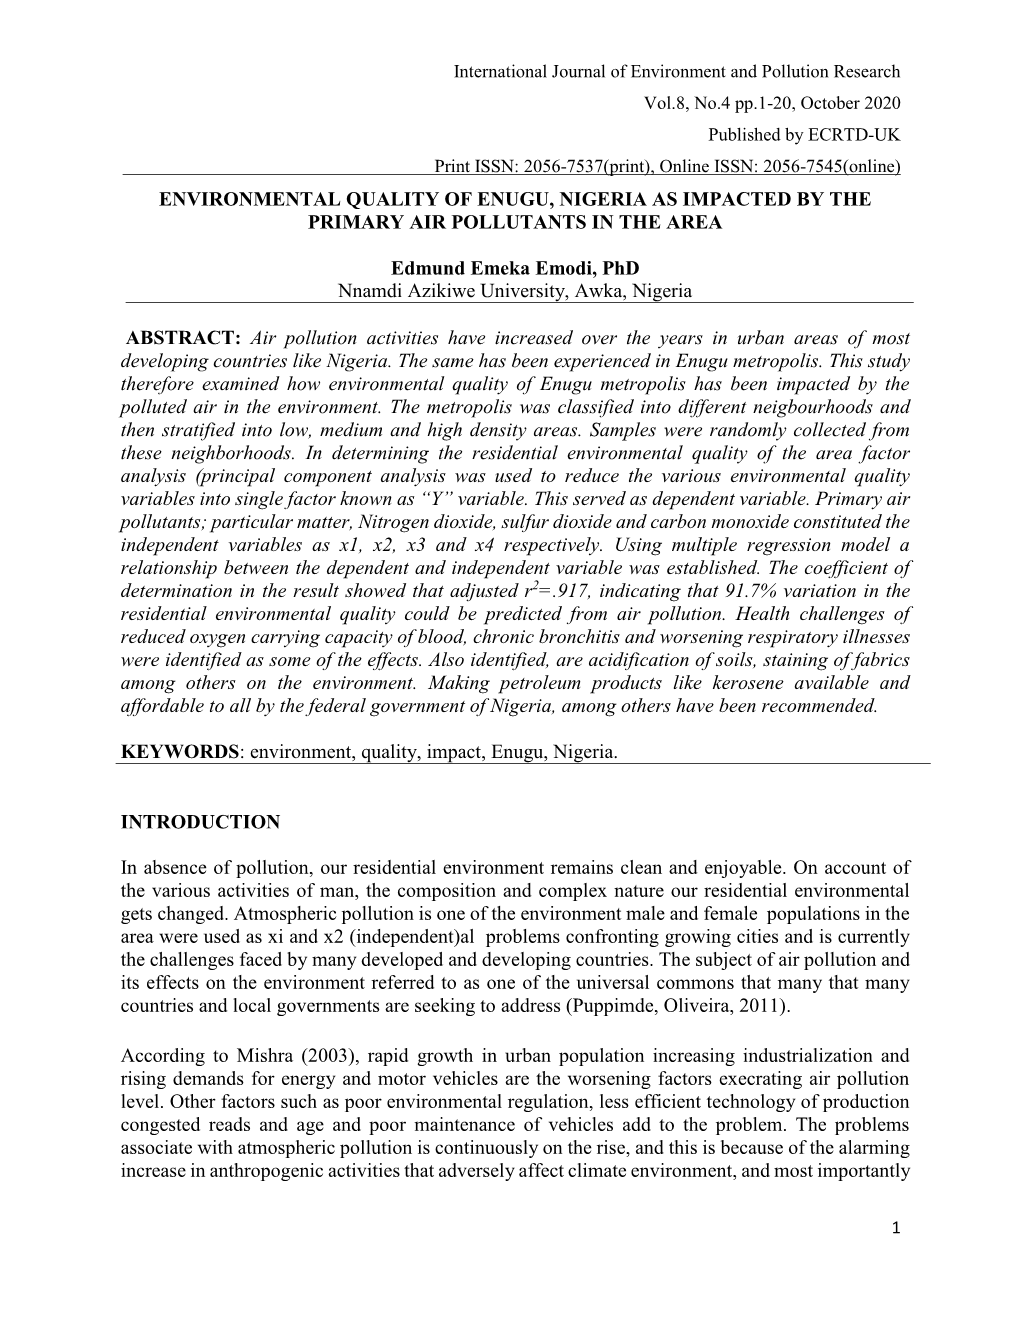 Environmental Quality of Enugu, Nigeria As Impacted by the Primary Air Pollutants in the Area